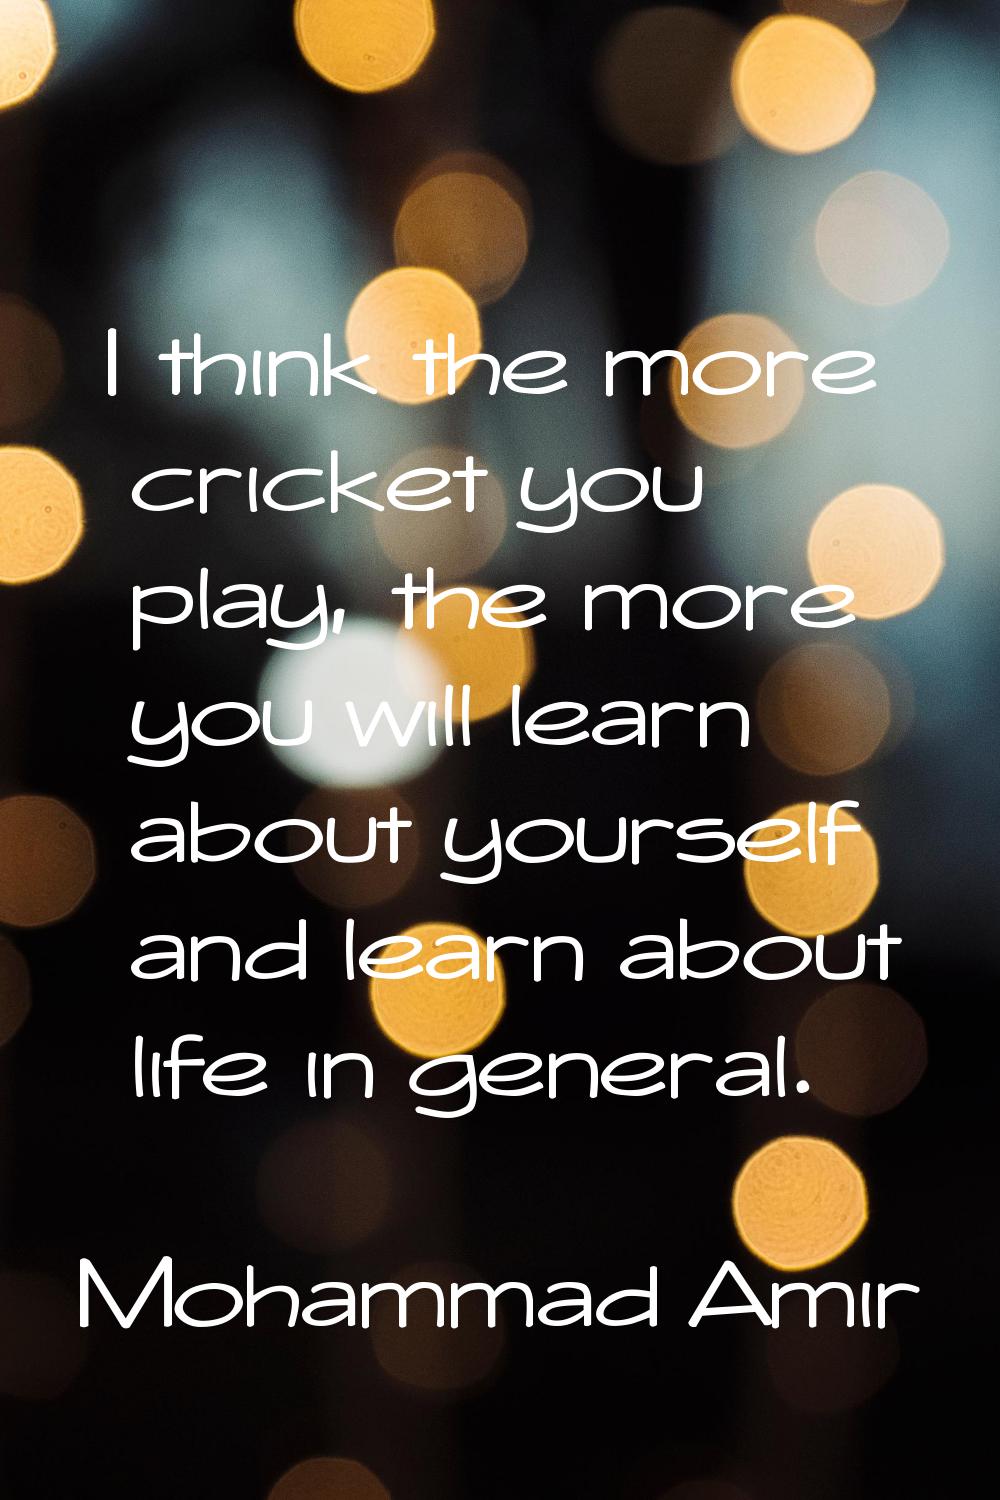 I think the more cricket you play, the more you will learn about yourself and learn about life in g